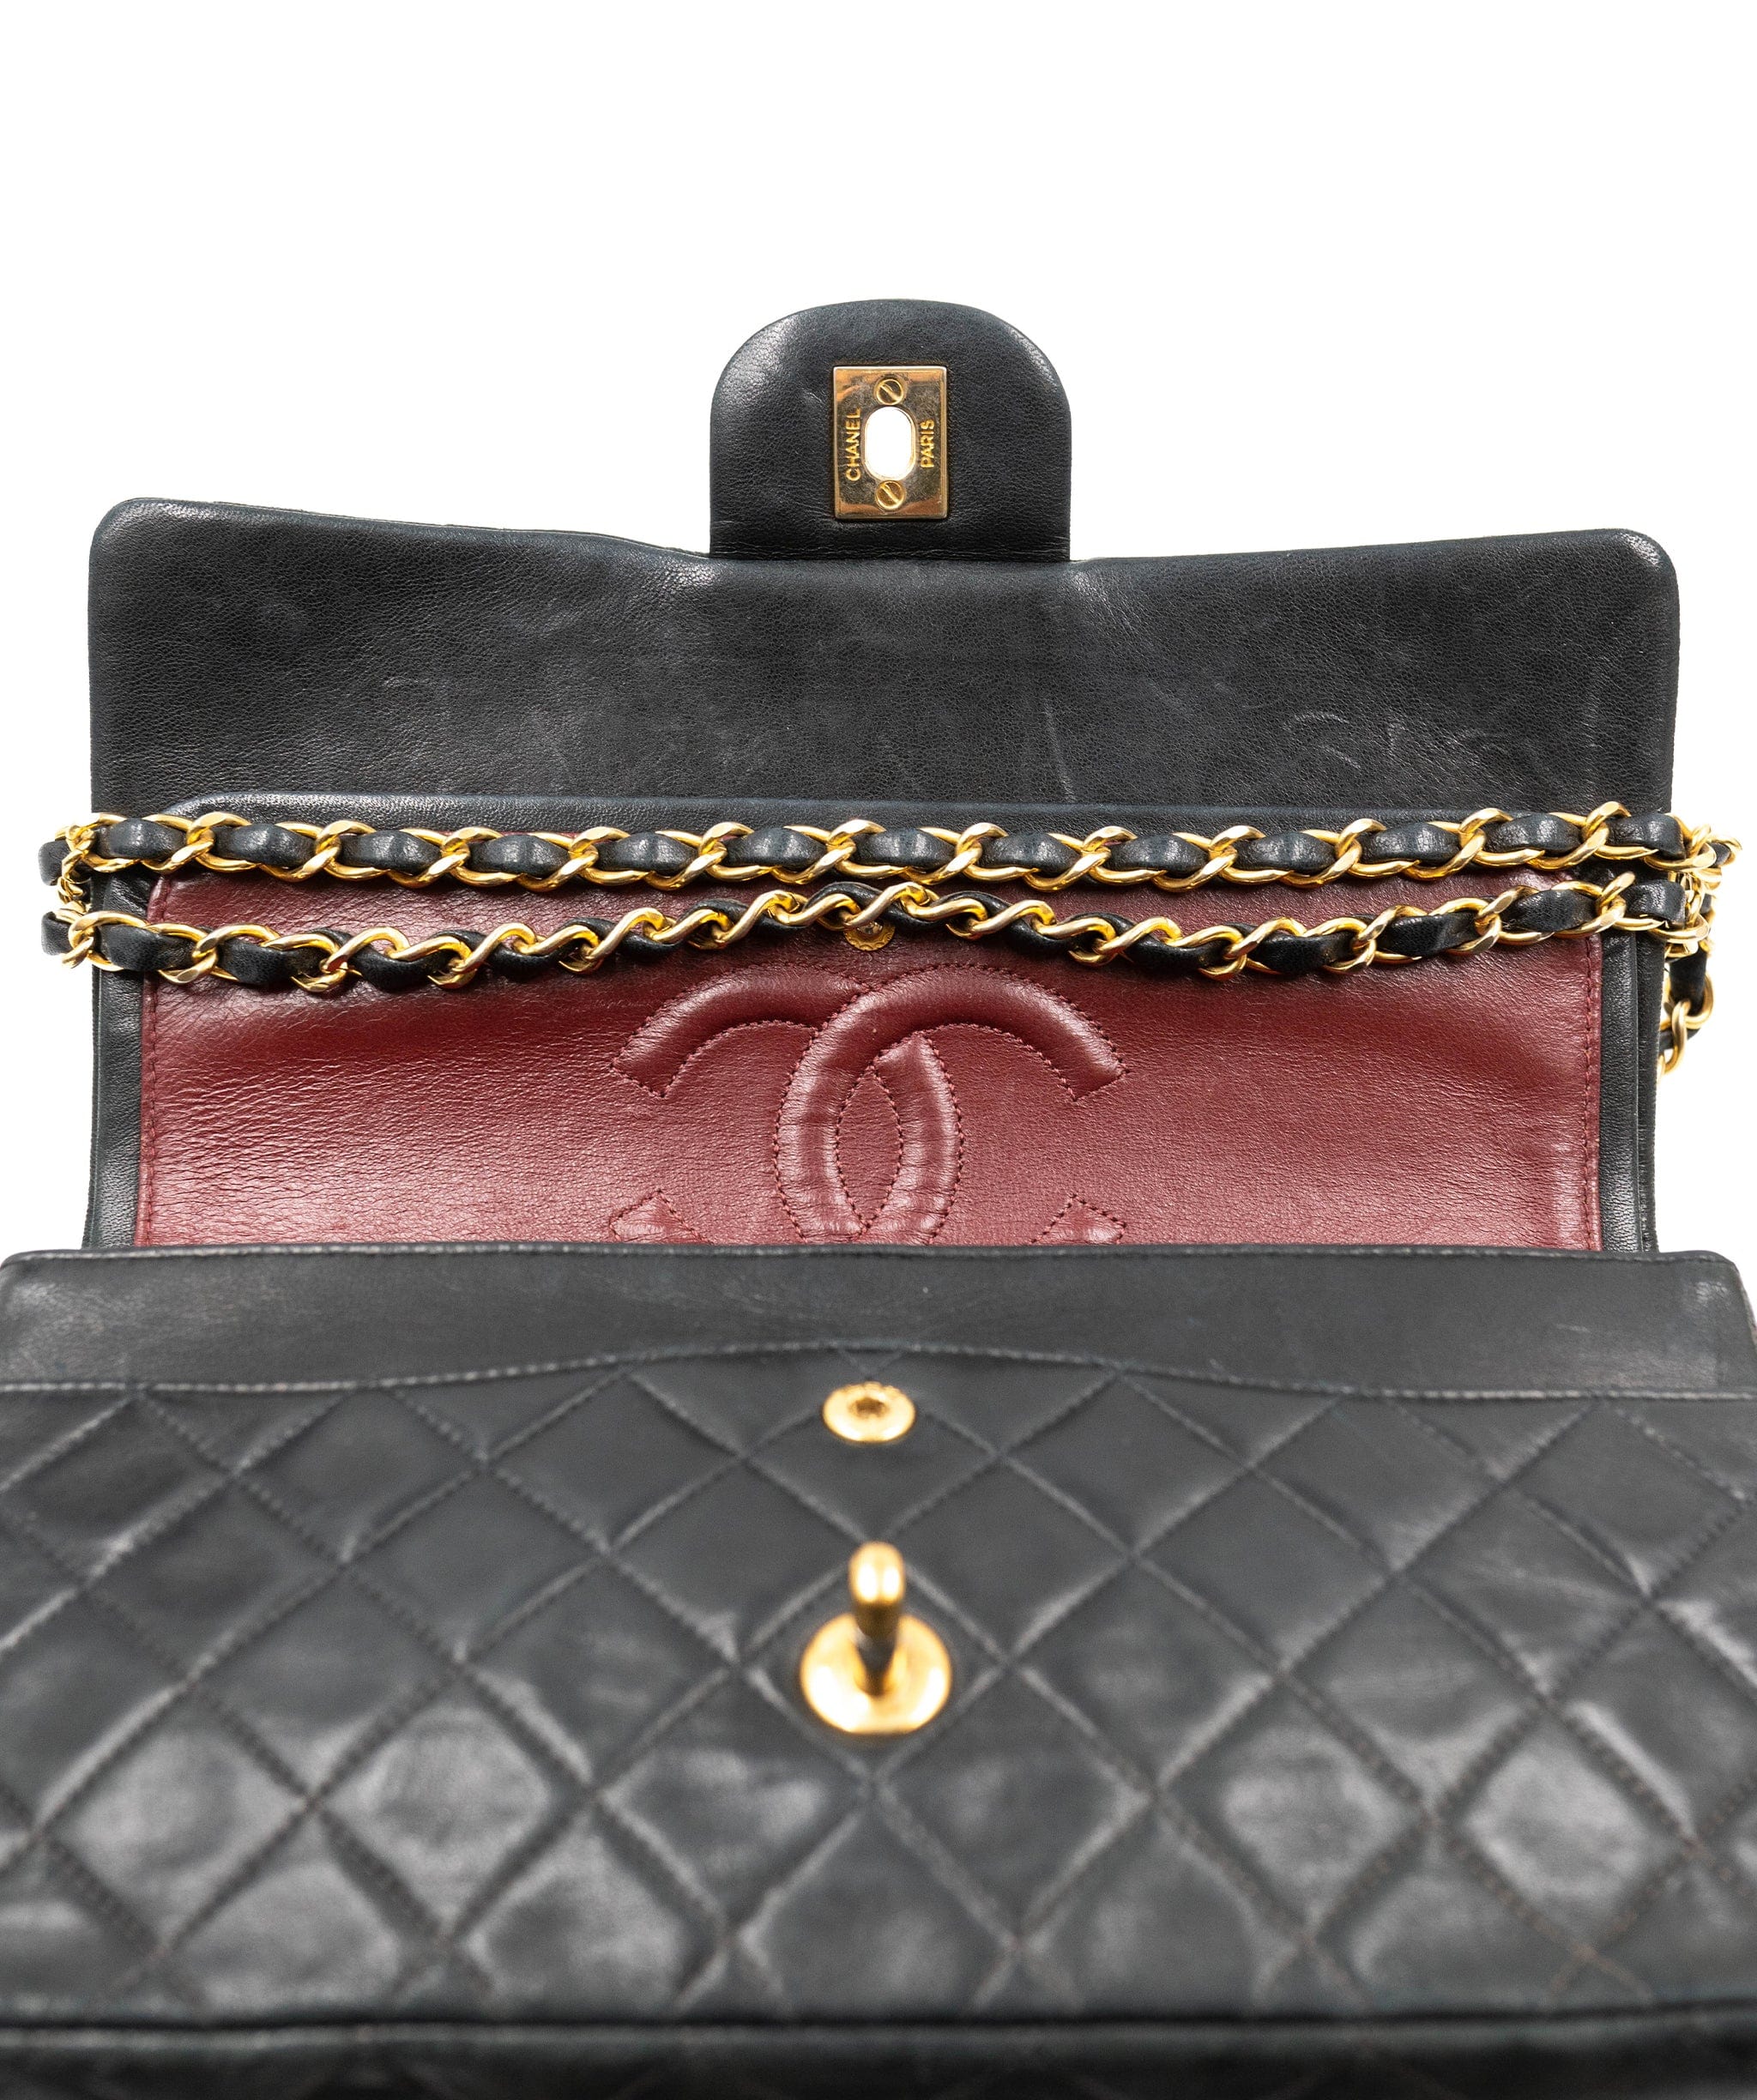 Chanel Chanel Medium Classic Double Flap Bag **wrong image attached please retake photos**